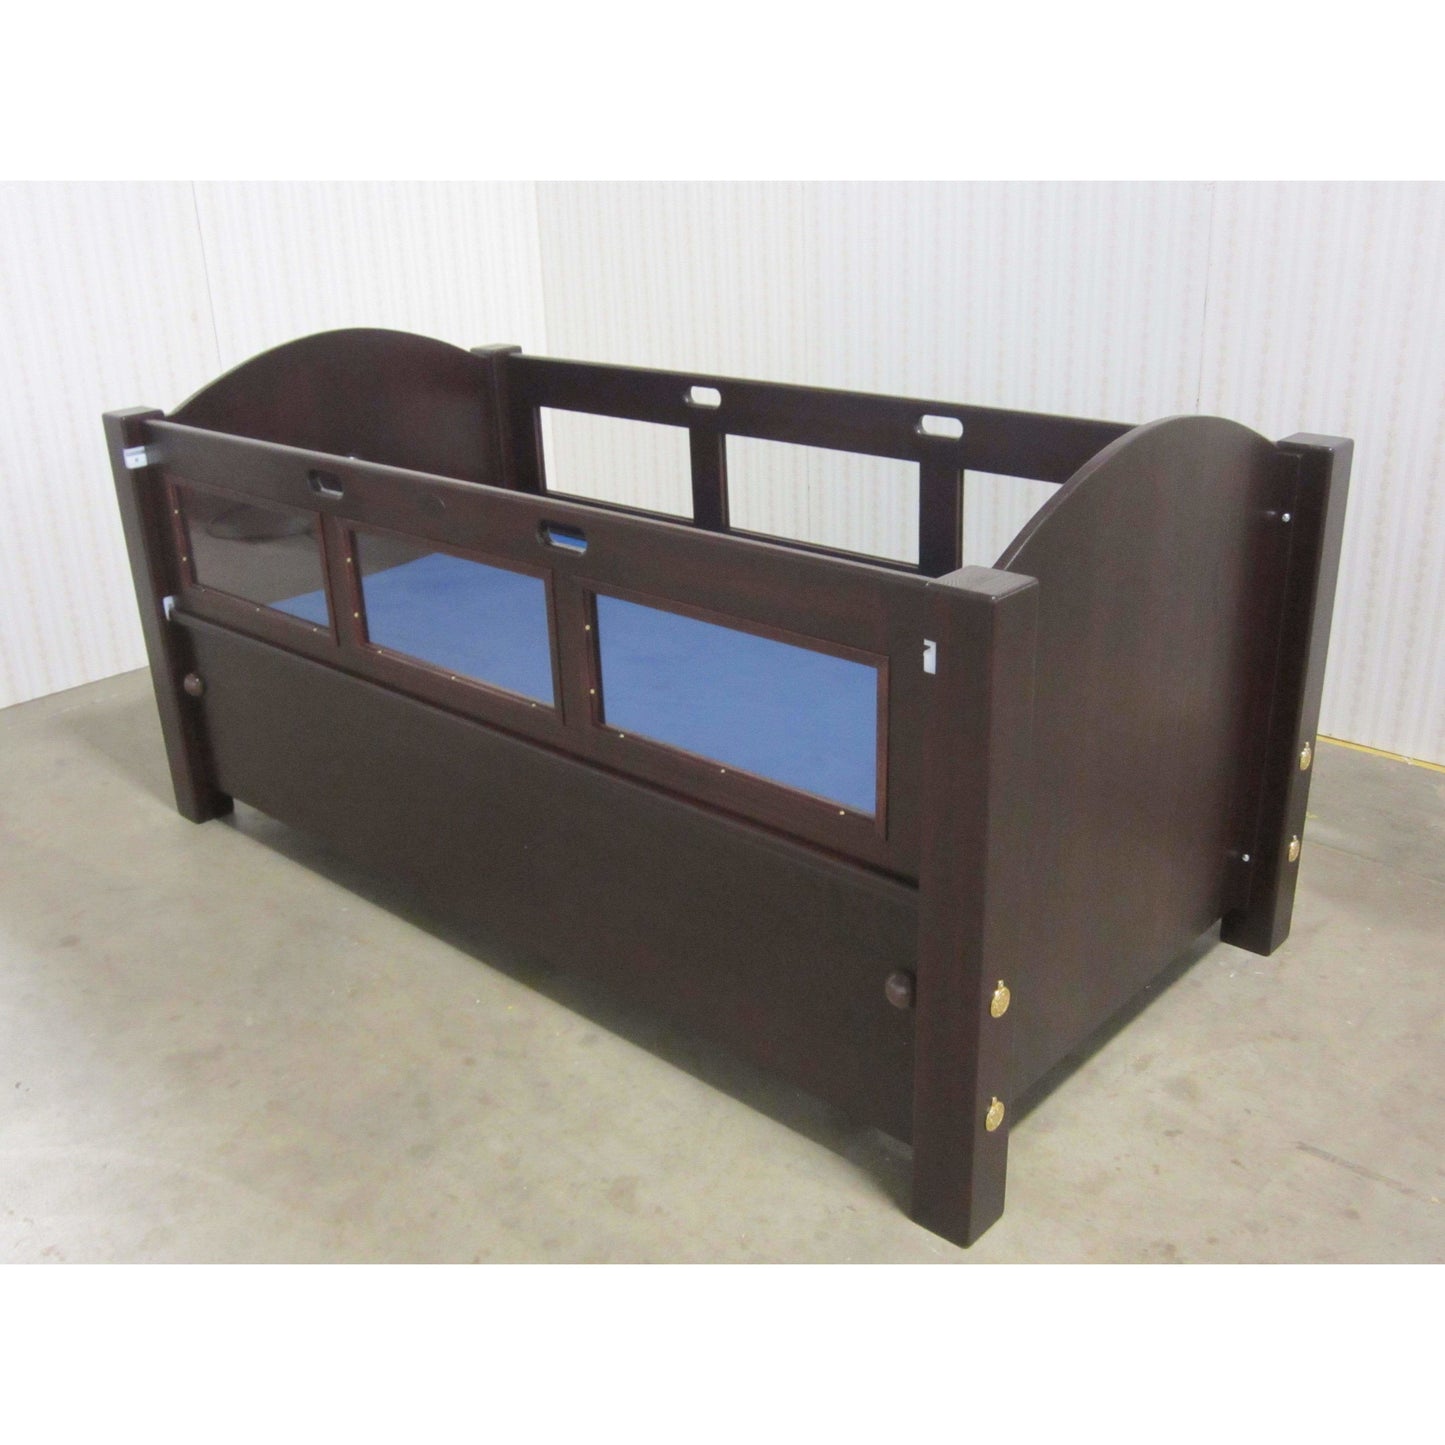 Beds by George Made to order Dream Series Fixed Surface Twin Size Bed - Standard BBG-1000